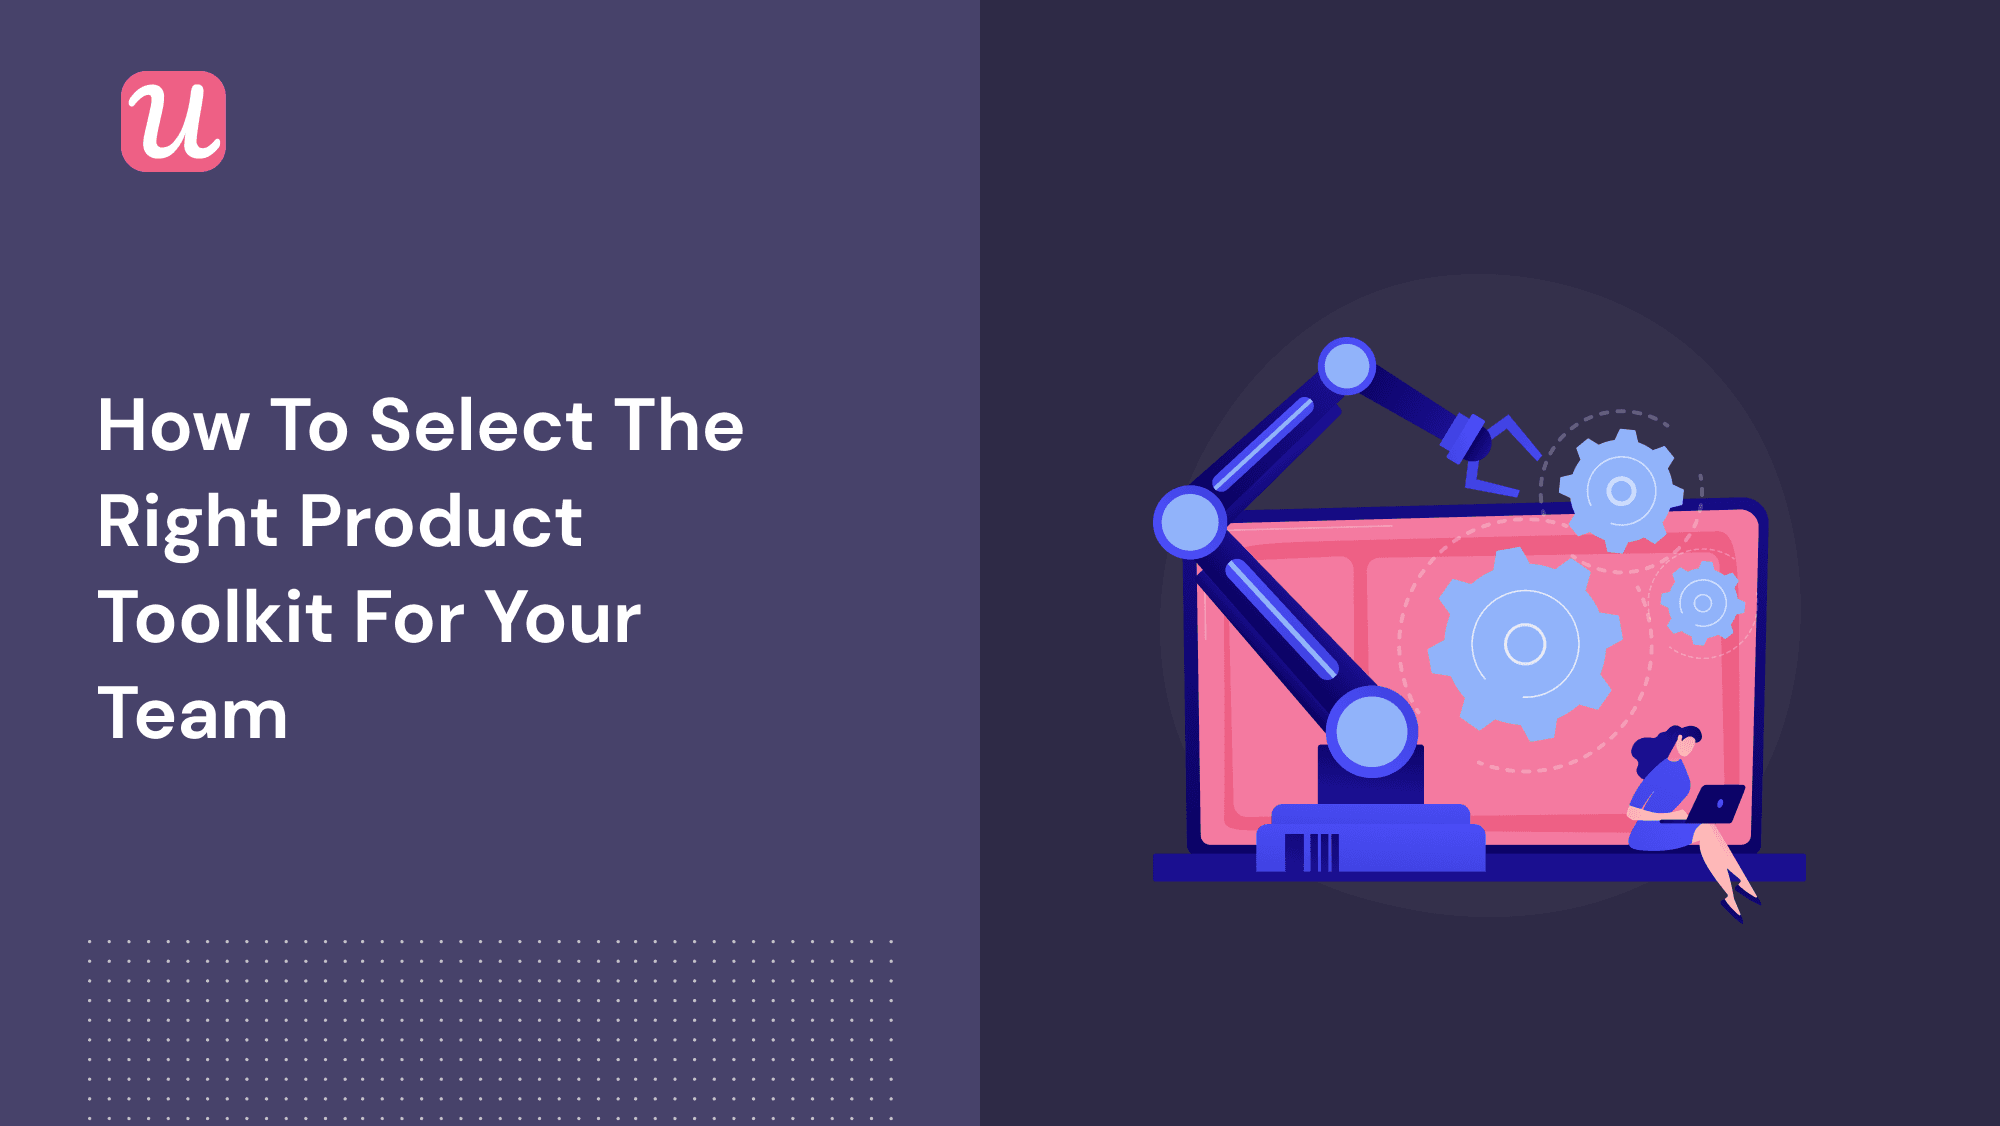 How to Select the Right Product Toolkit for Your Team